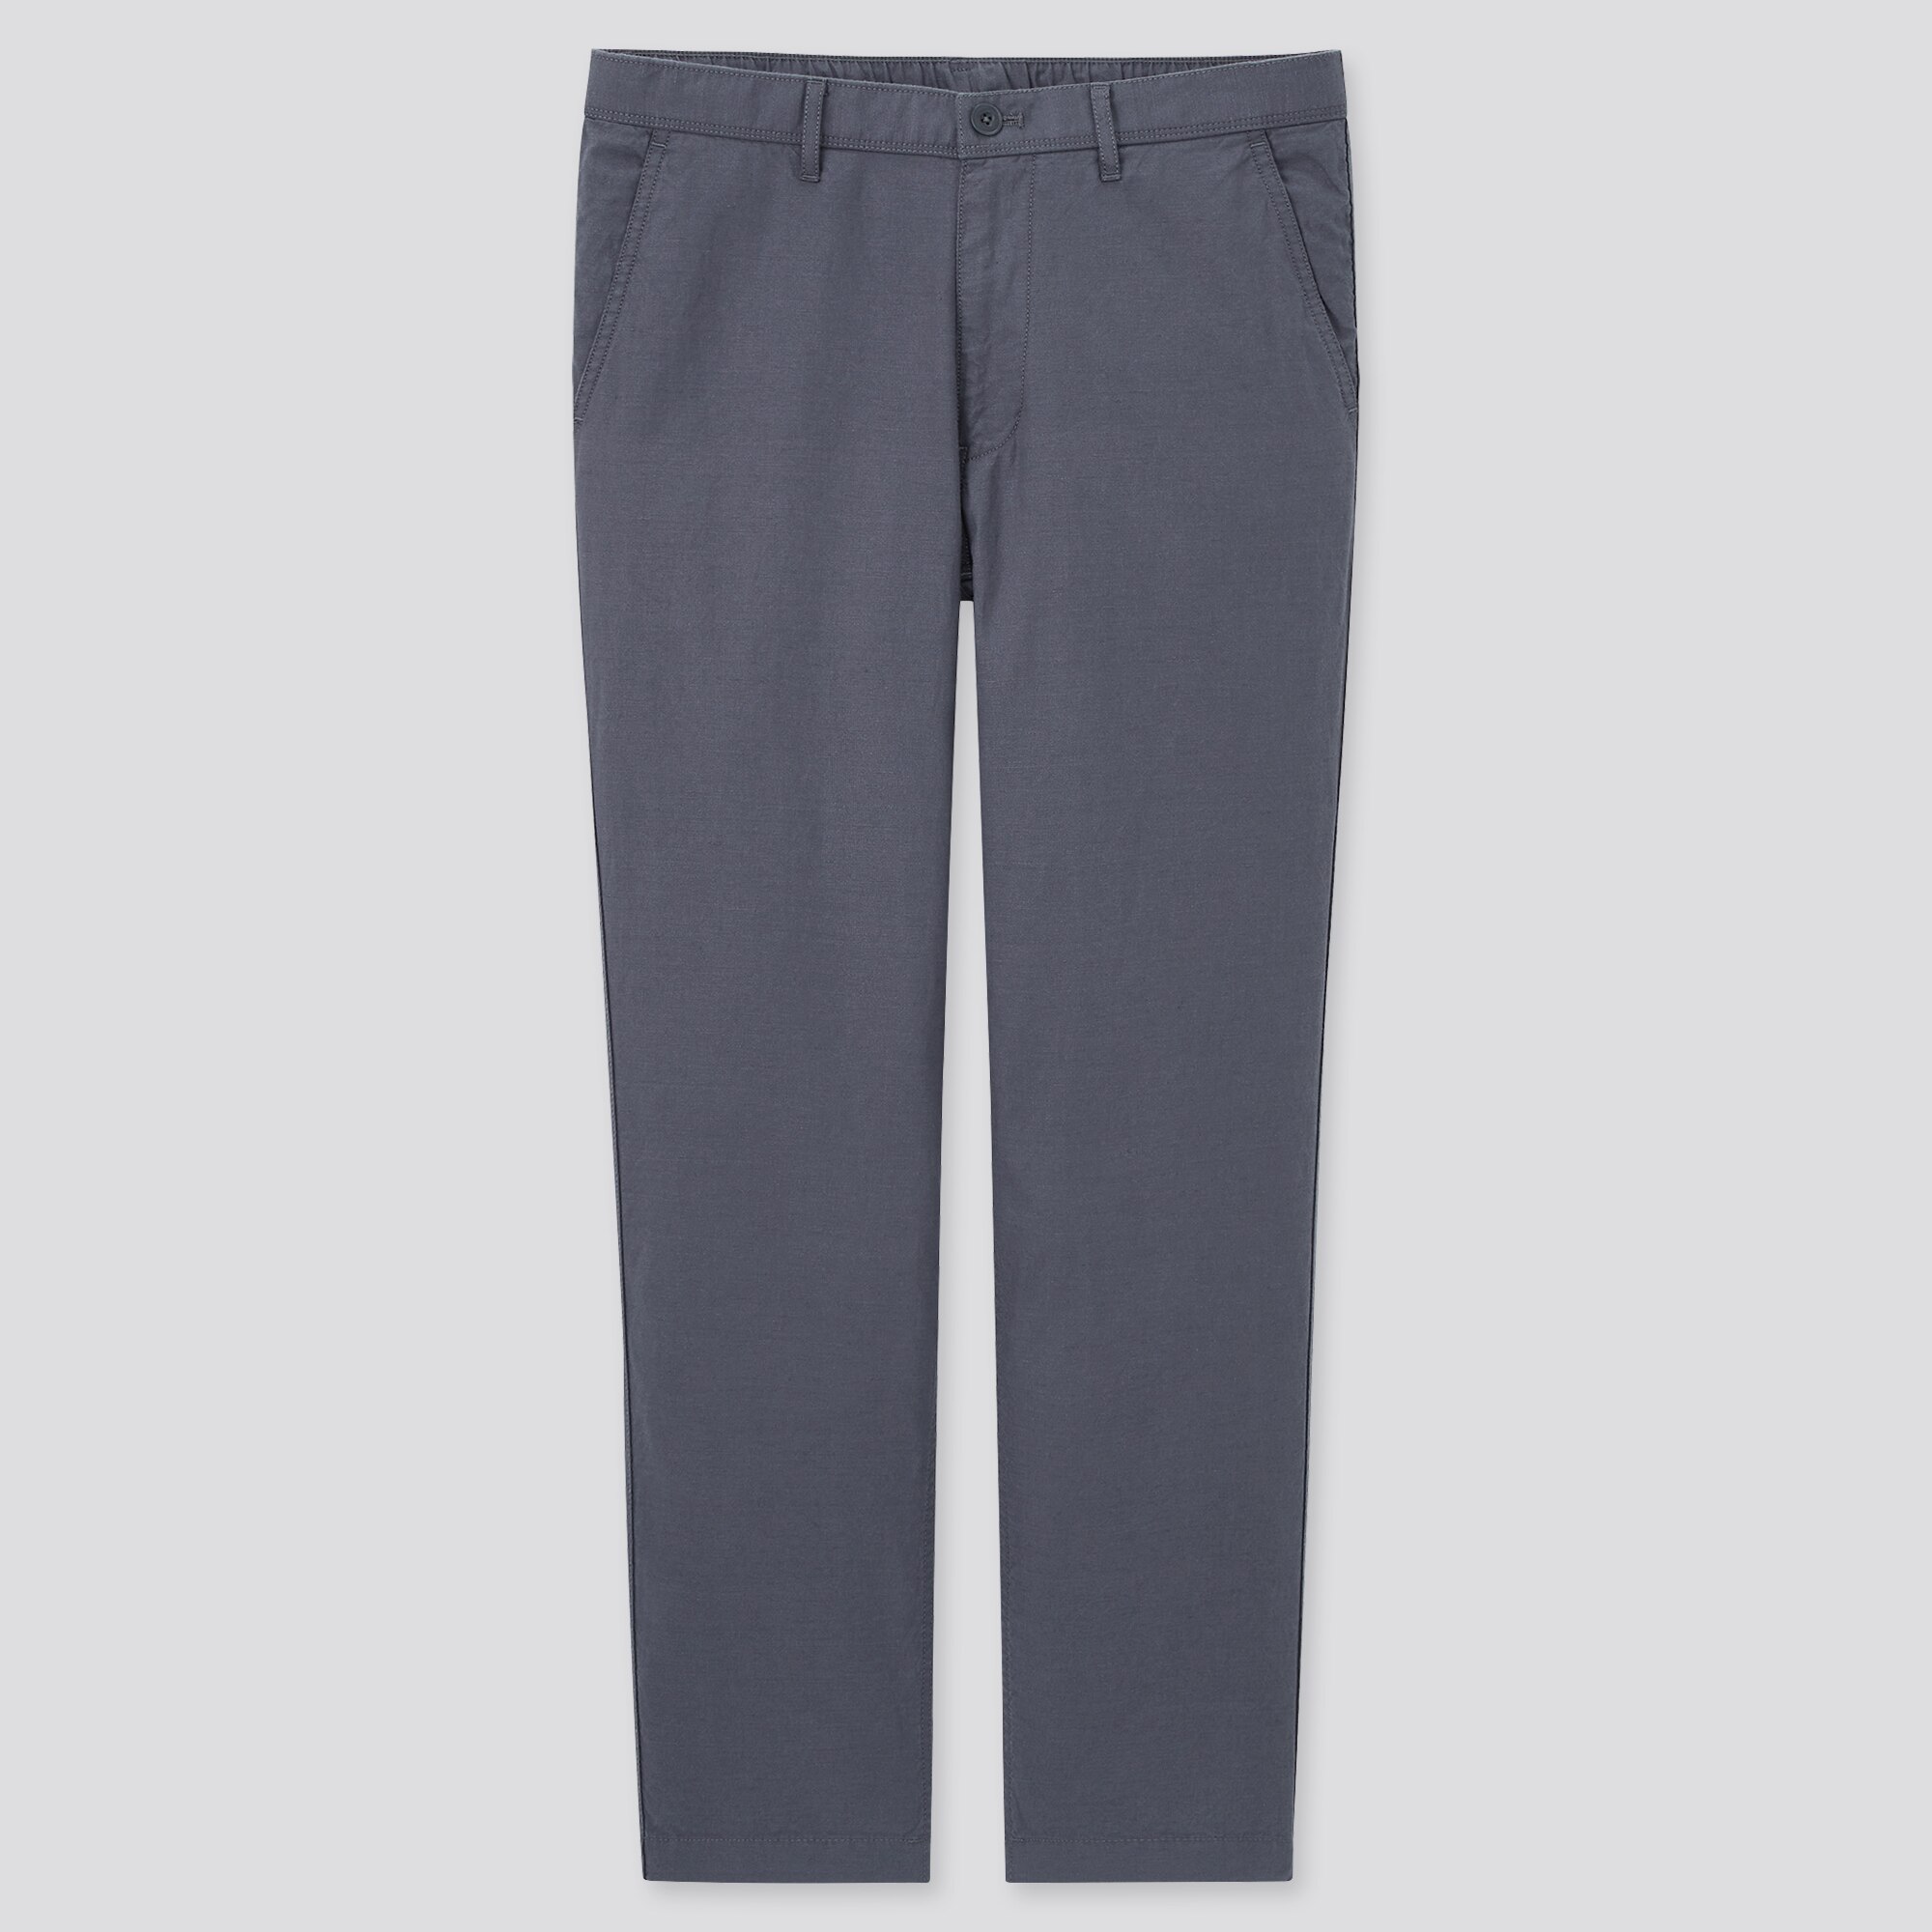 Uniqlo womens Medium linen blend relaxed trousers pants ankle 27 inseam   eBay